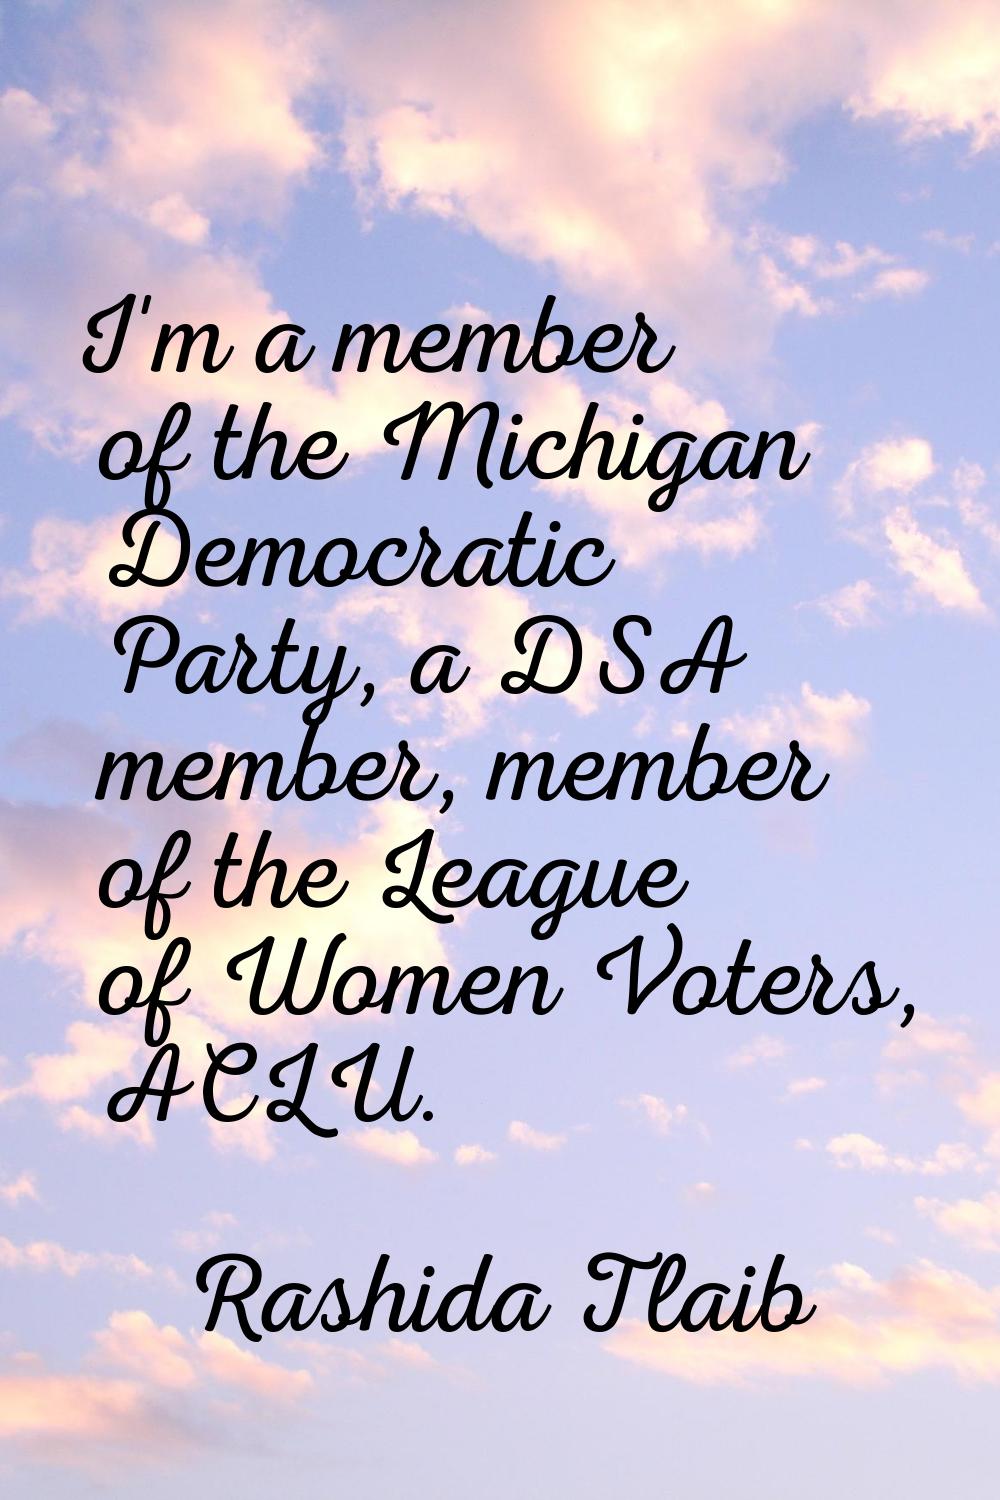 I'm a member of the Michigan Democratic Party, a DSA member, member of the League of Women Voters, 